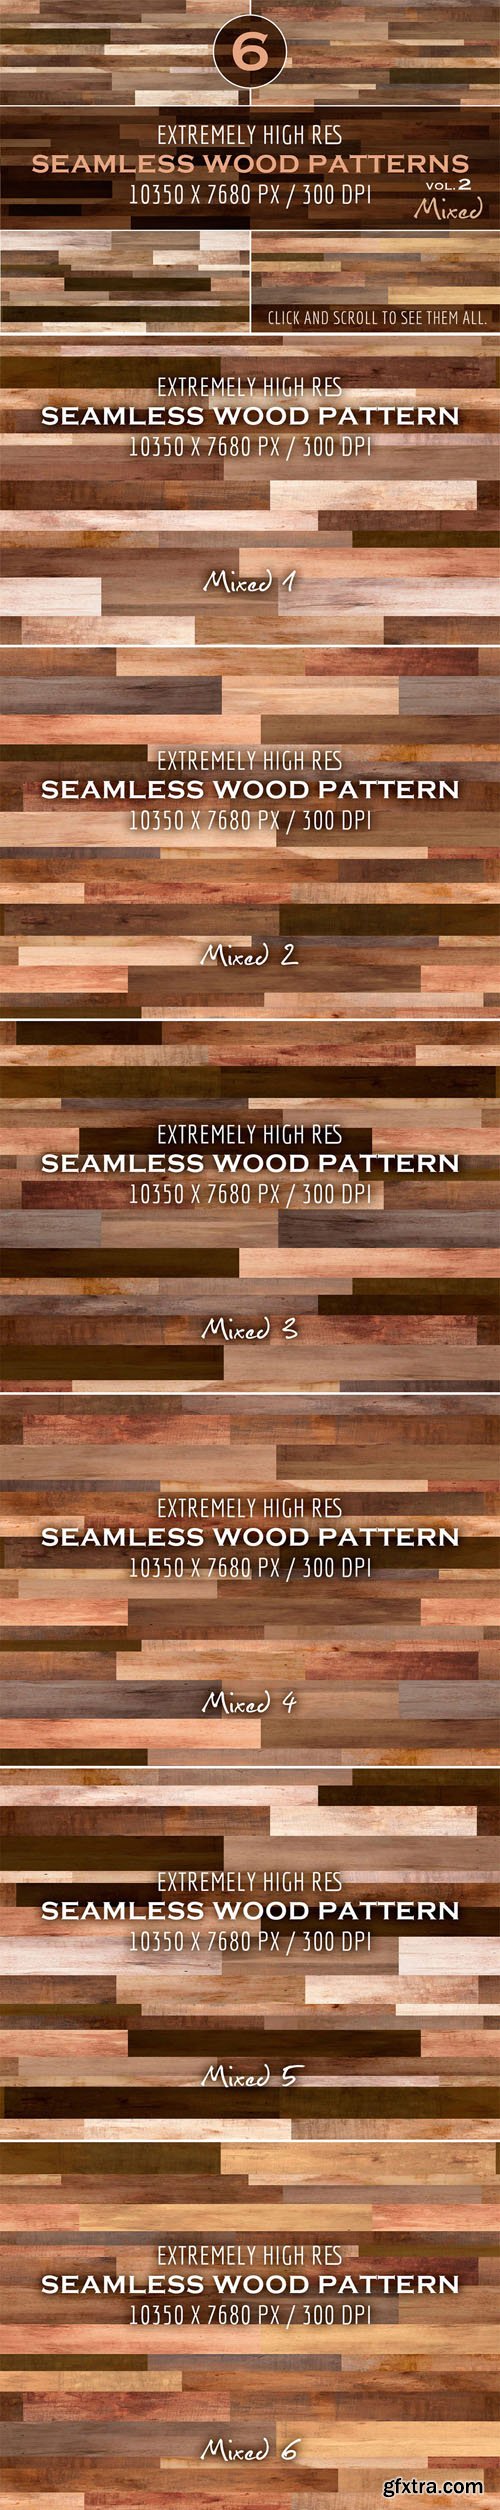 Extremely HR seamless wood patterns - CM 288147